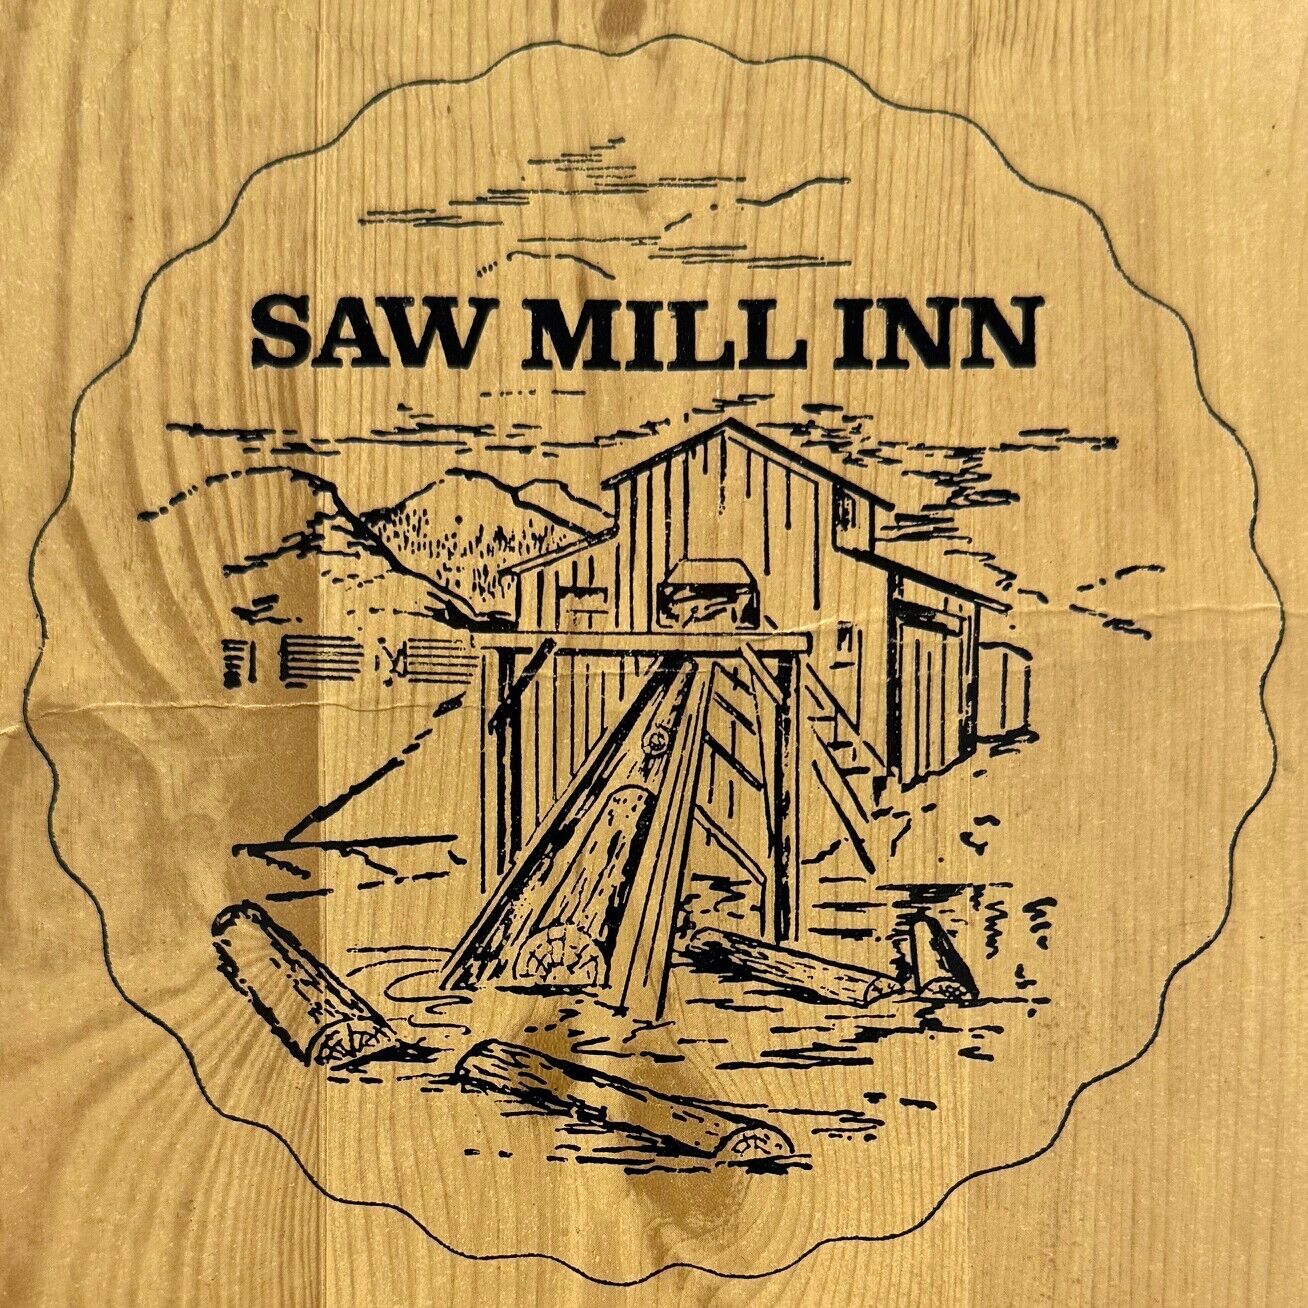 1960s Saw Mill Inn Restaurant Menu 1901 Old West Chester Pike Havertown PA